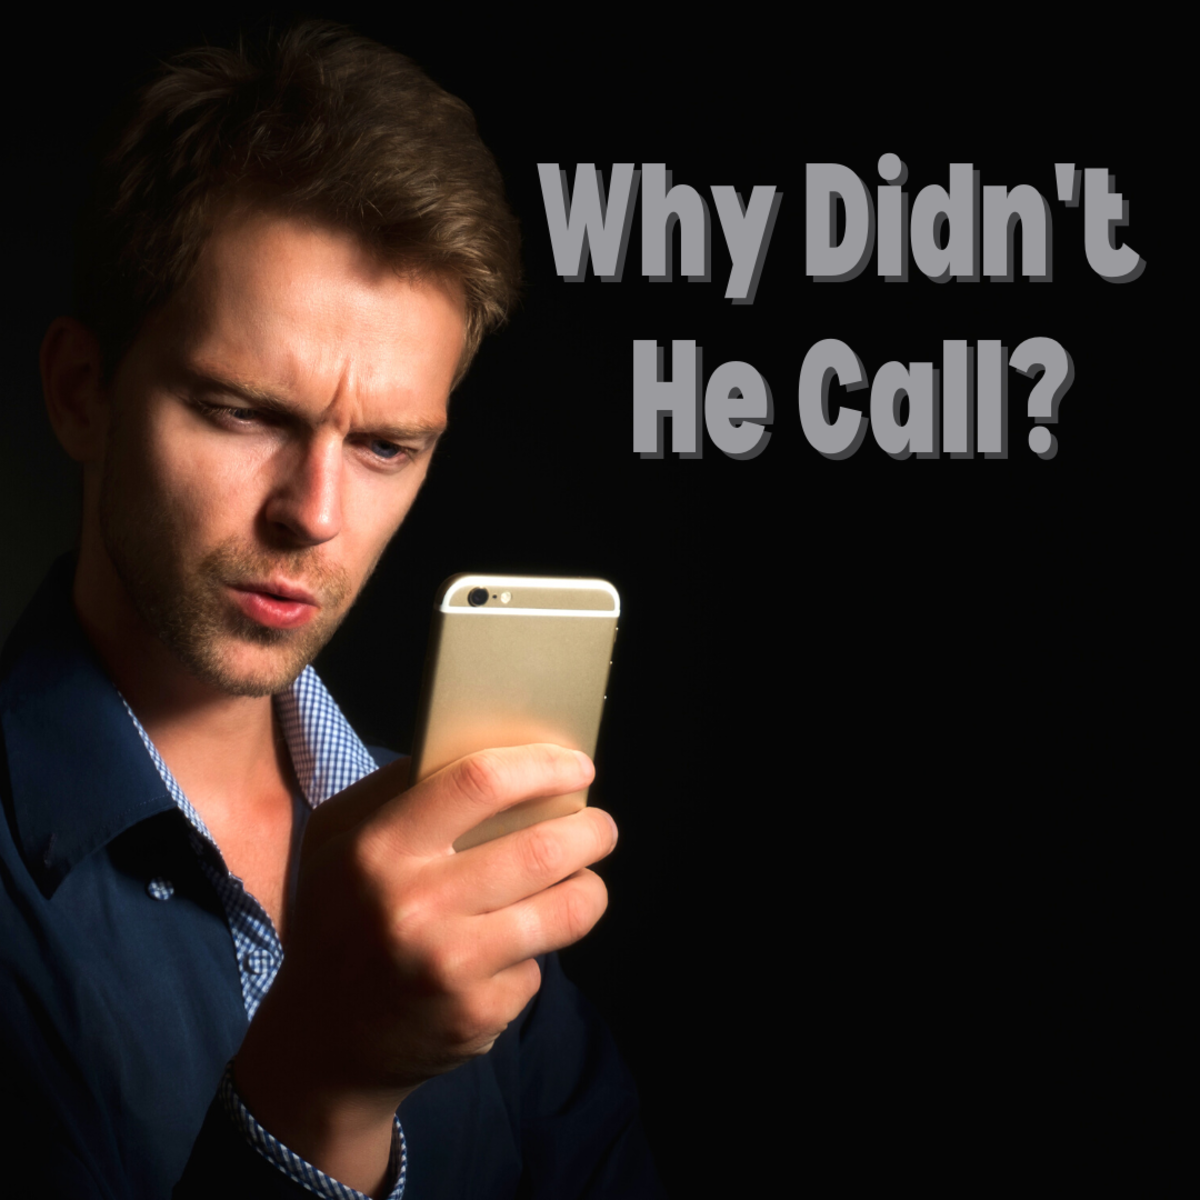 You had a great time on the date (or so you thought), so why did he wait too long to call?